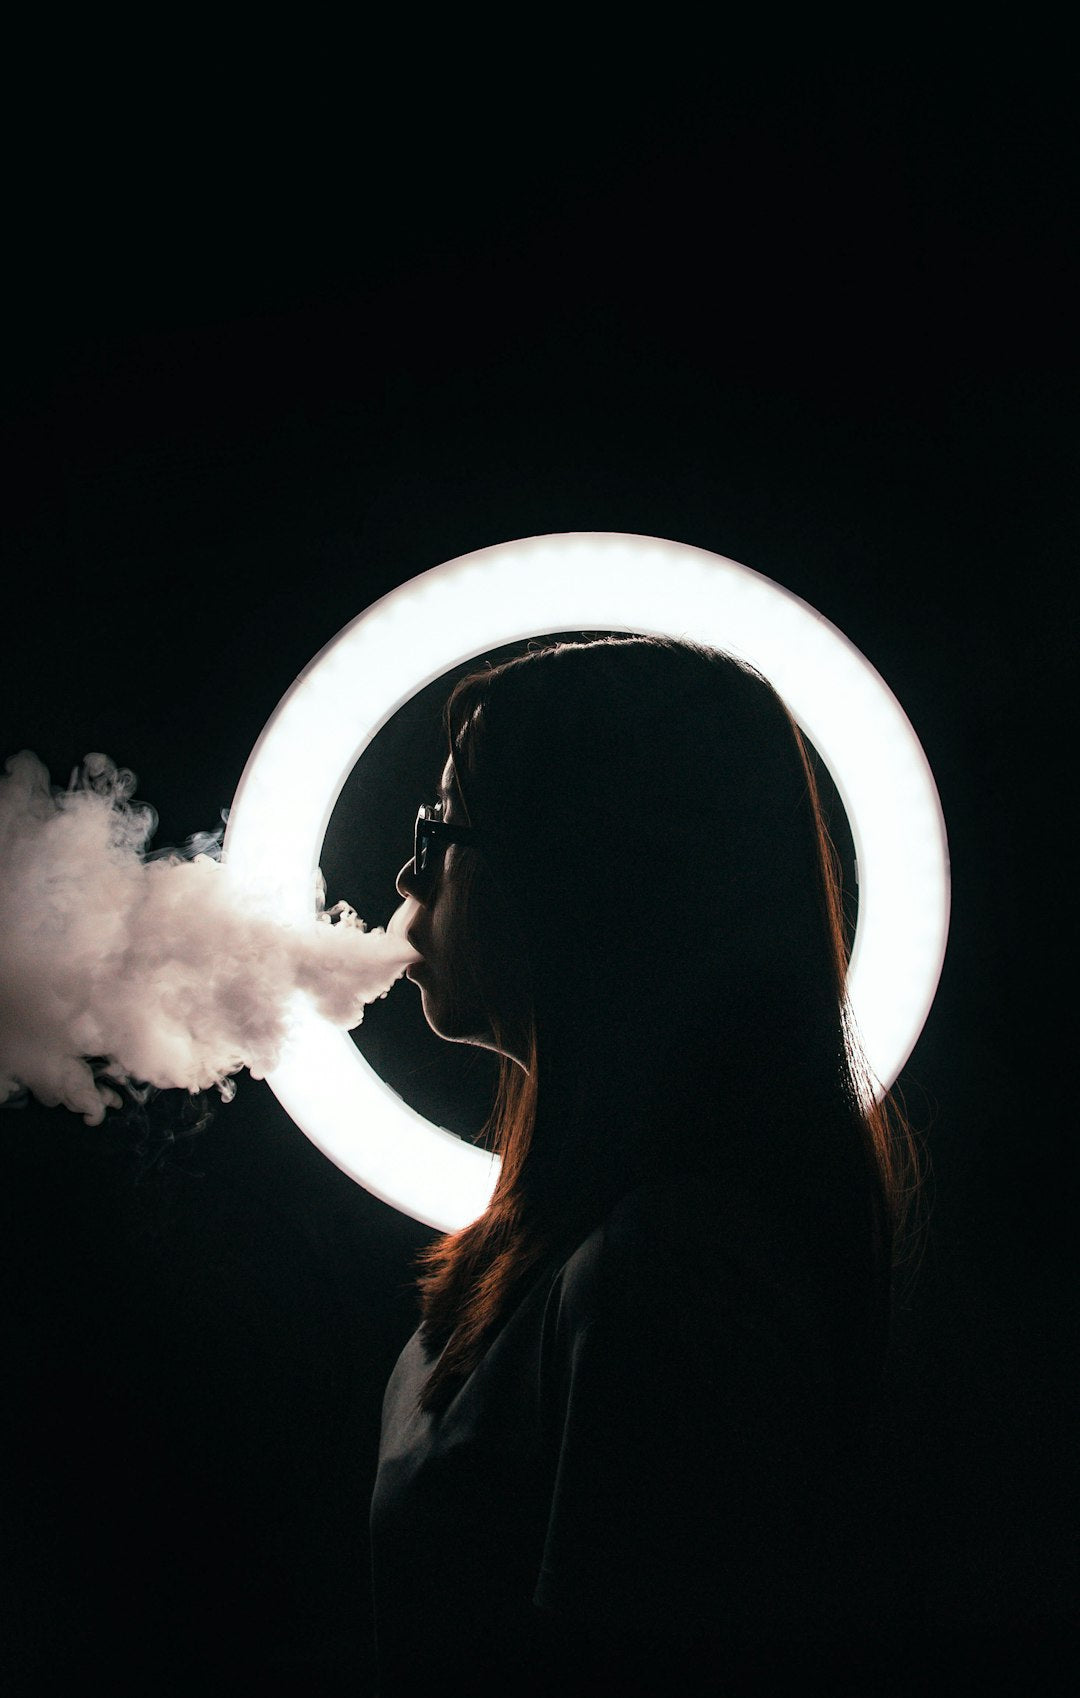 Vaping Regulations: What You Need to Know